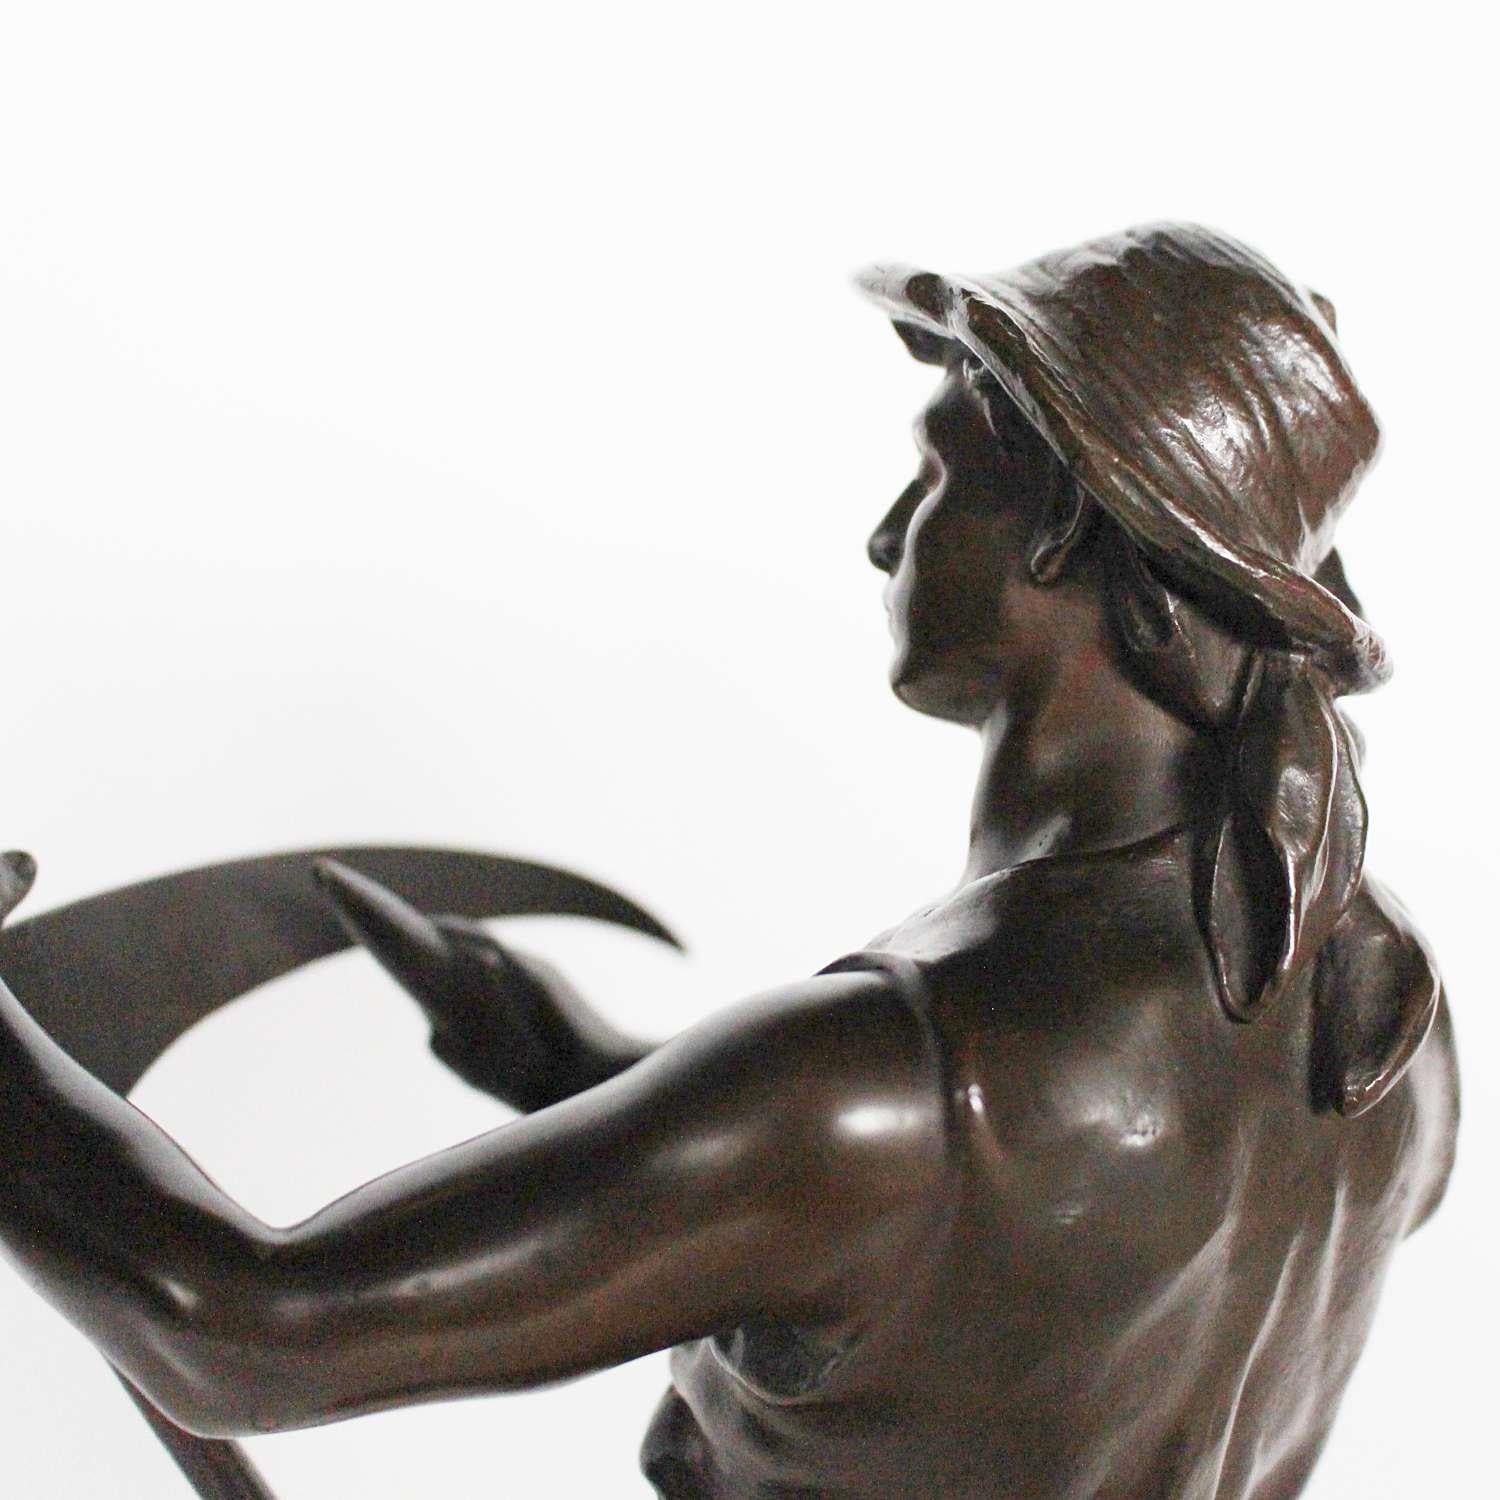 20th Century Art Nouveau Bronze Sculpture by Mathurin Moreau Signed and Stamped, circa 1890